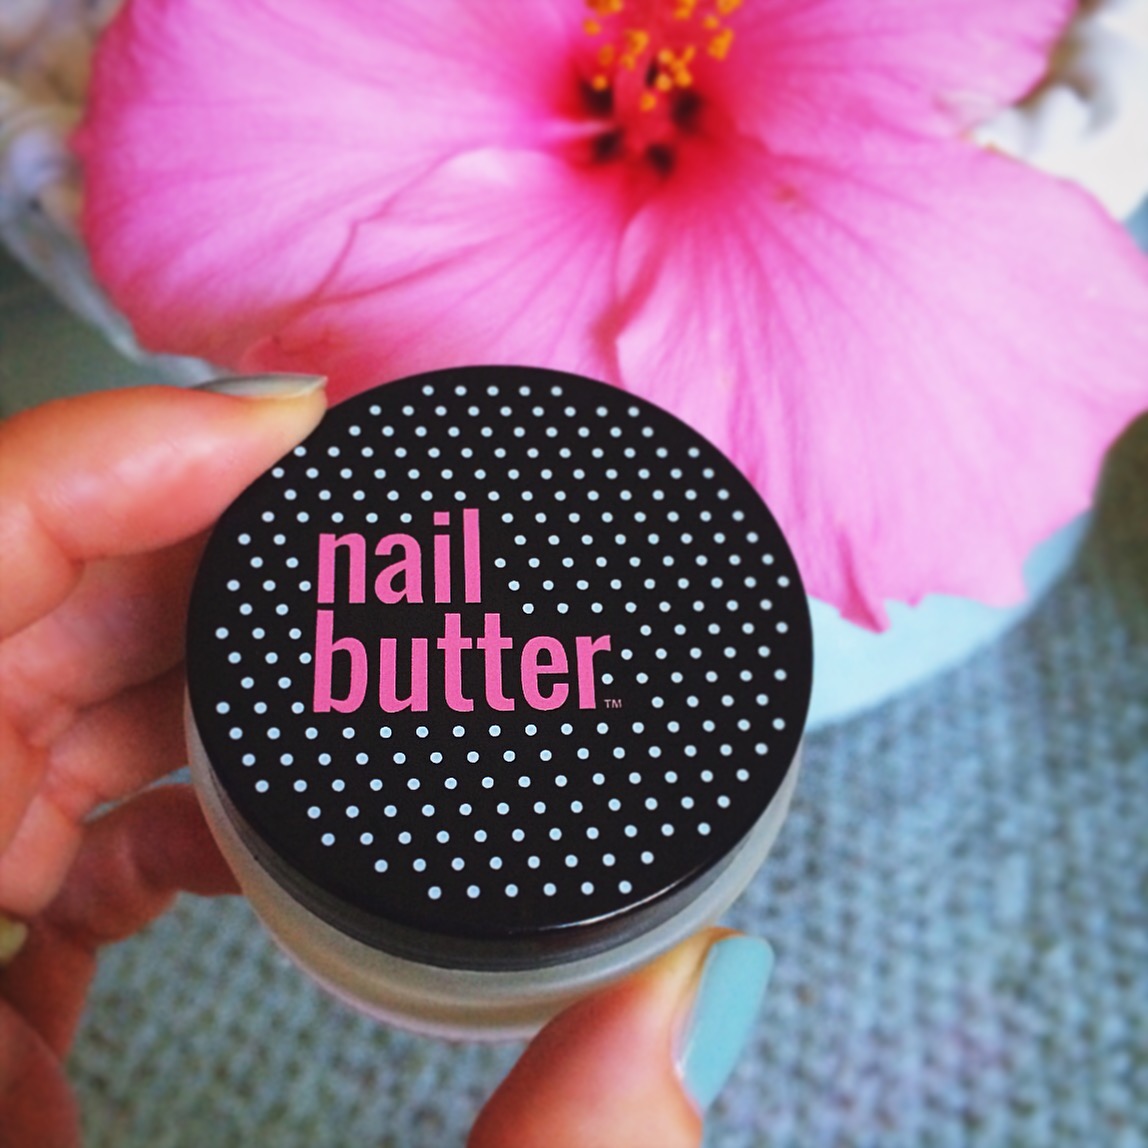 Nail Butter Will Give You Nails Like, Well, Buttah